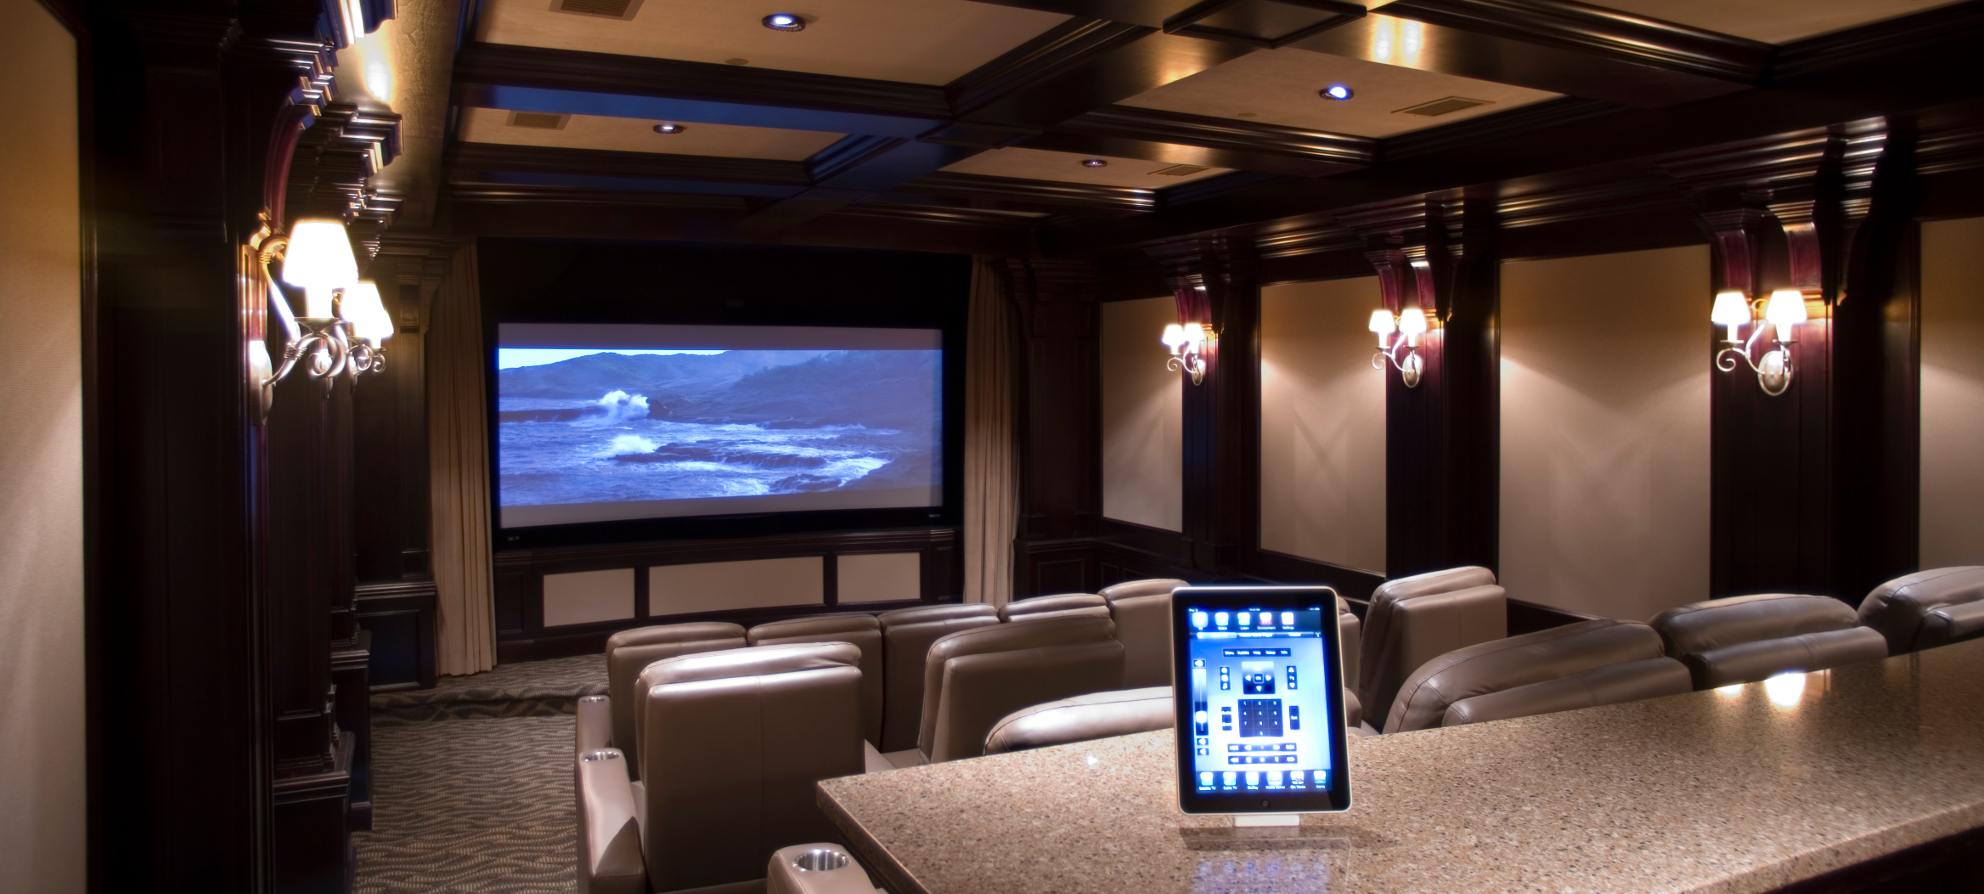 Home Theatre Automation